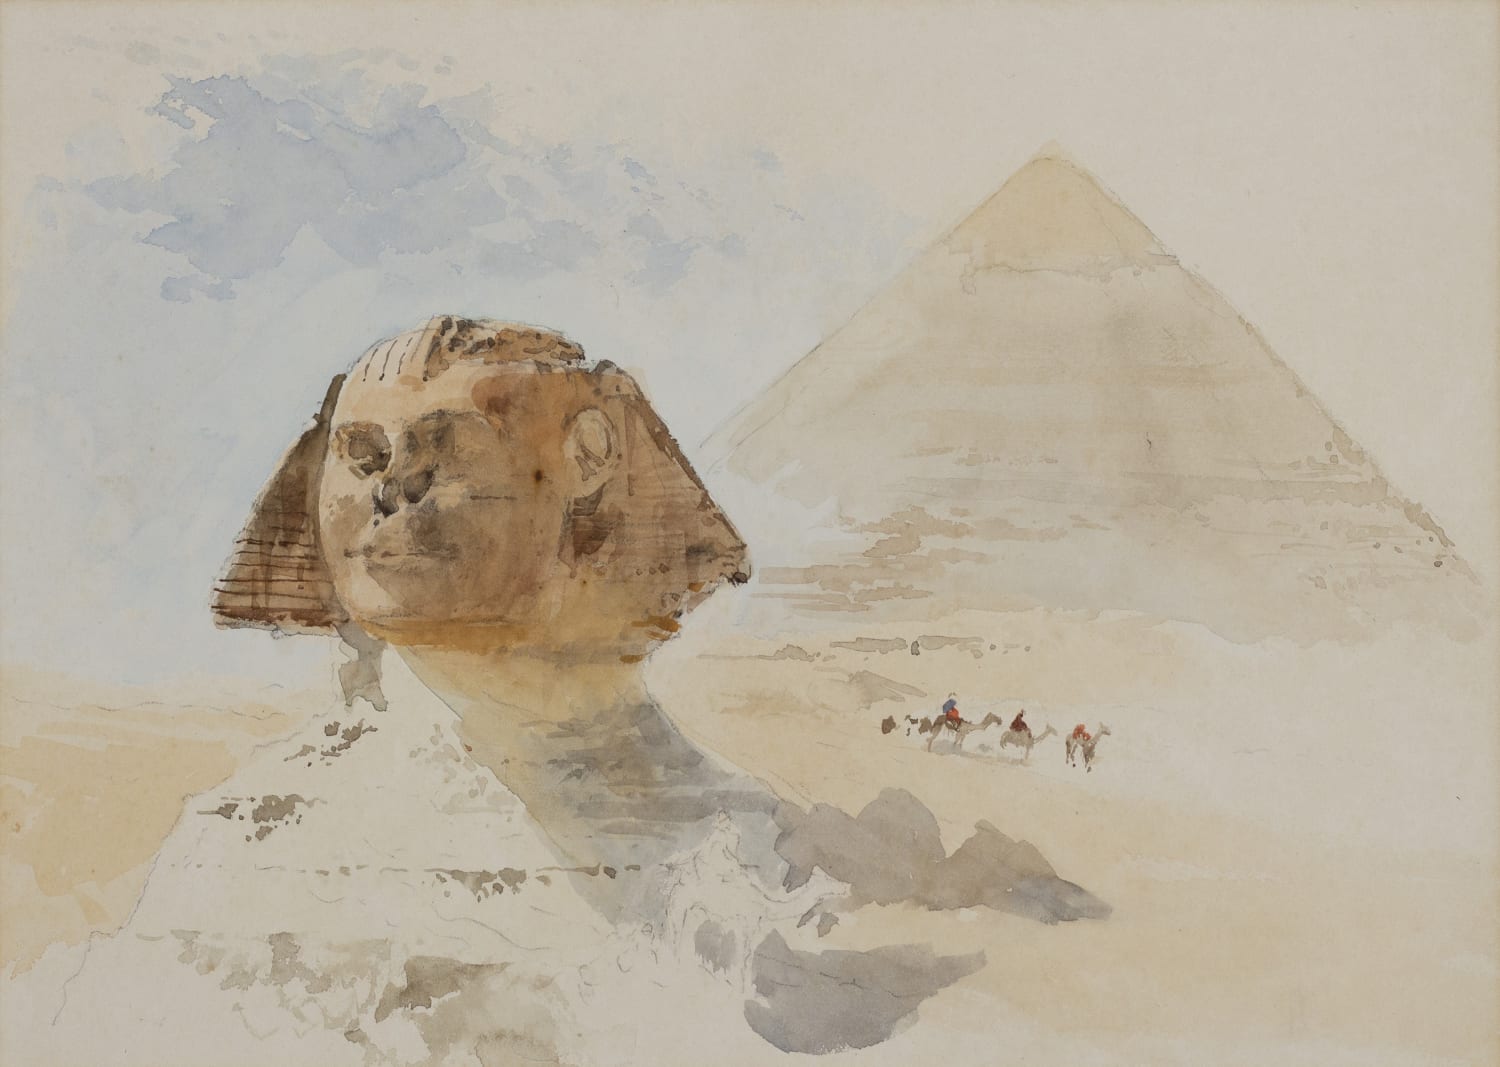 Keeley Halswelle ARSA (1832-91) Sphinx and Great Pyramid of Cheops, Giza  Watercolour on paper, around 1888, 25.3 x 35.5cm  Purchased from Lawrences (Auctioneers), Taunton, 2020. 2020.0122.2